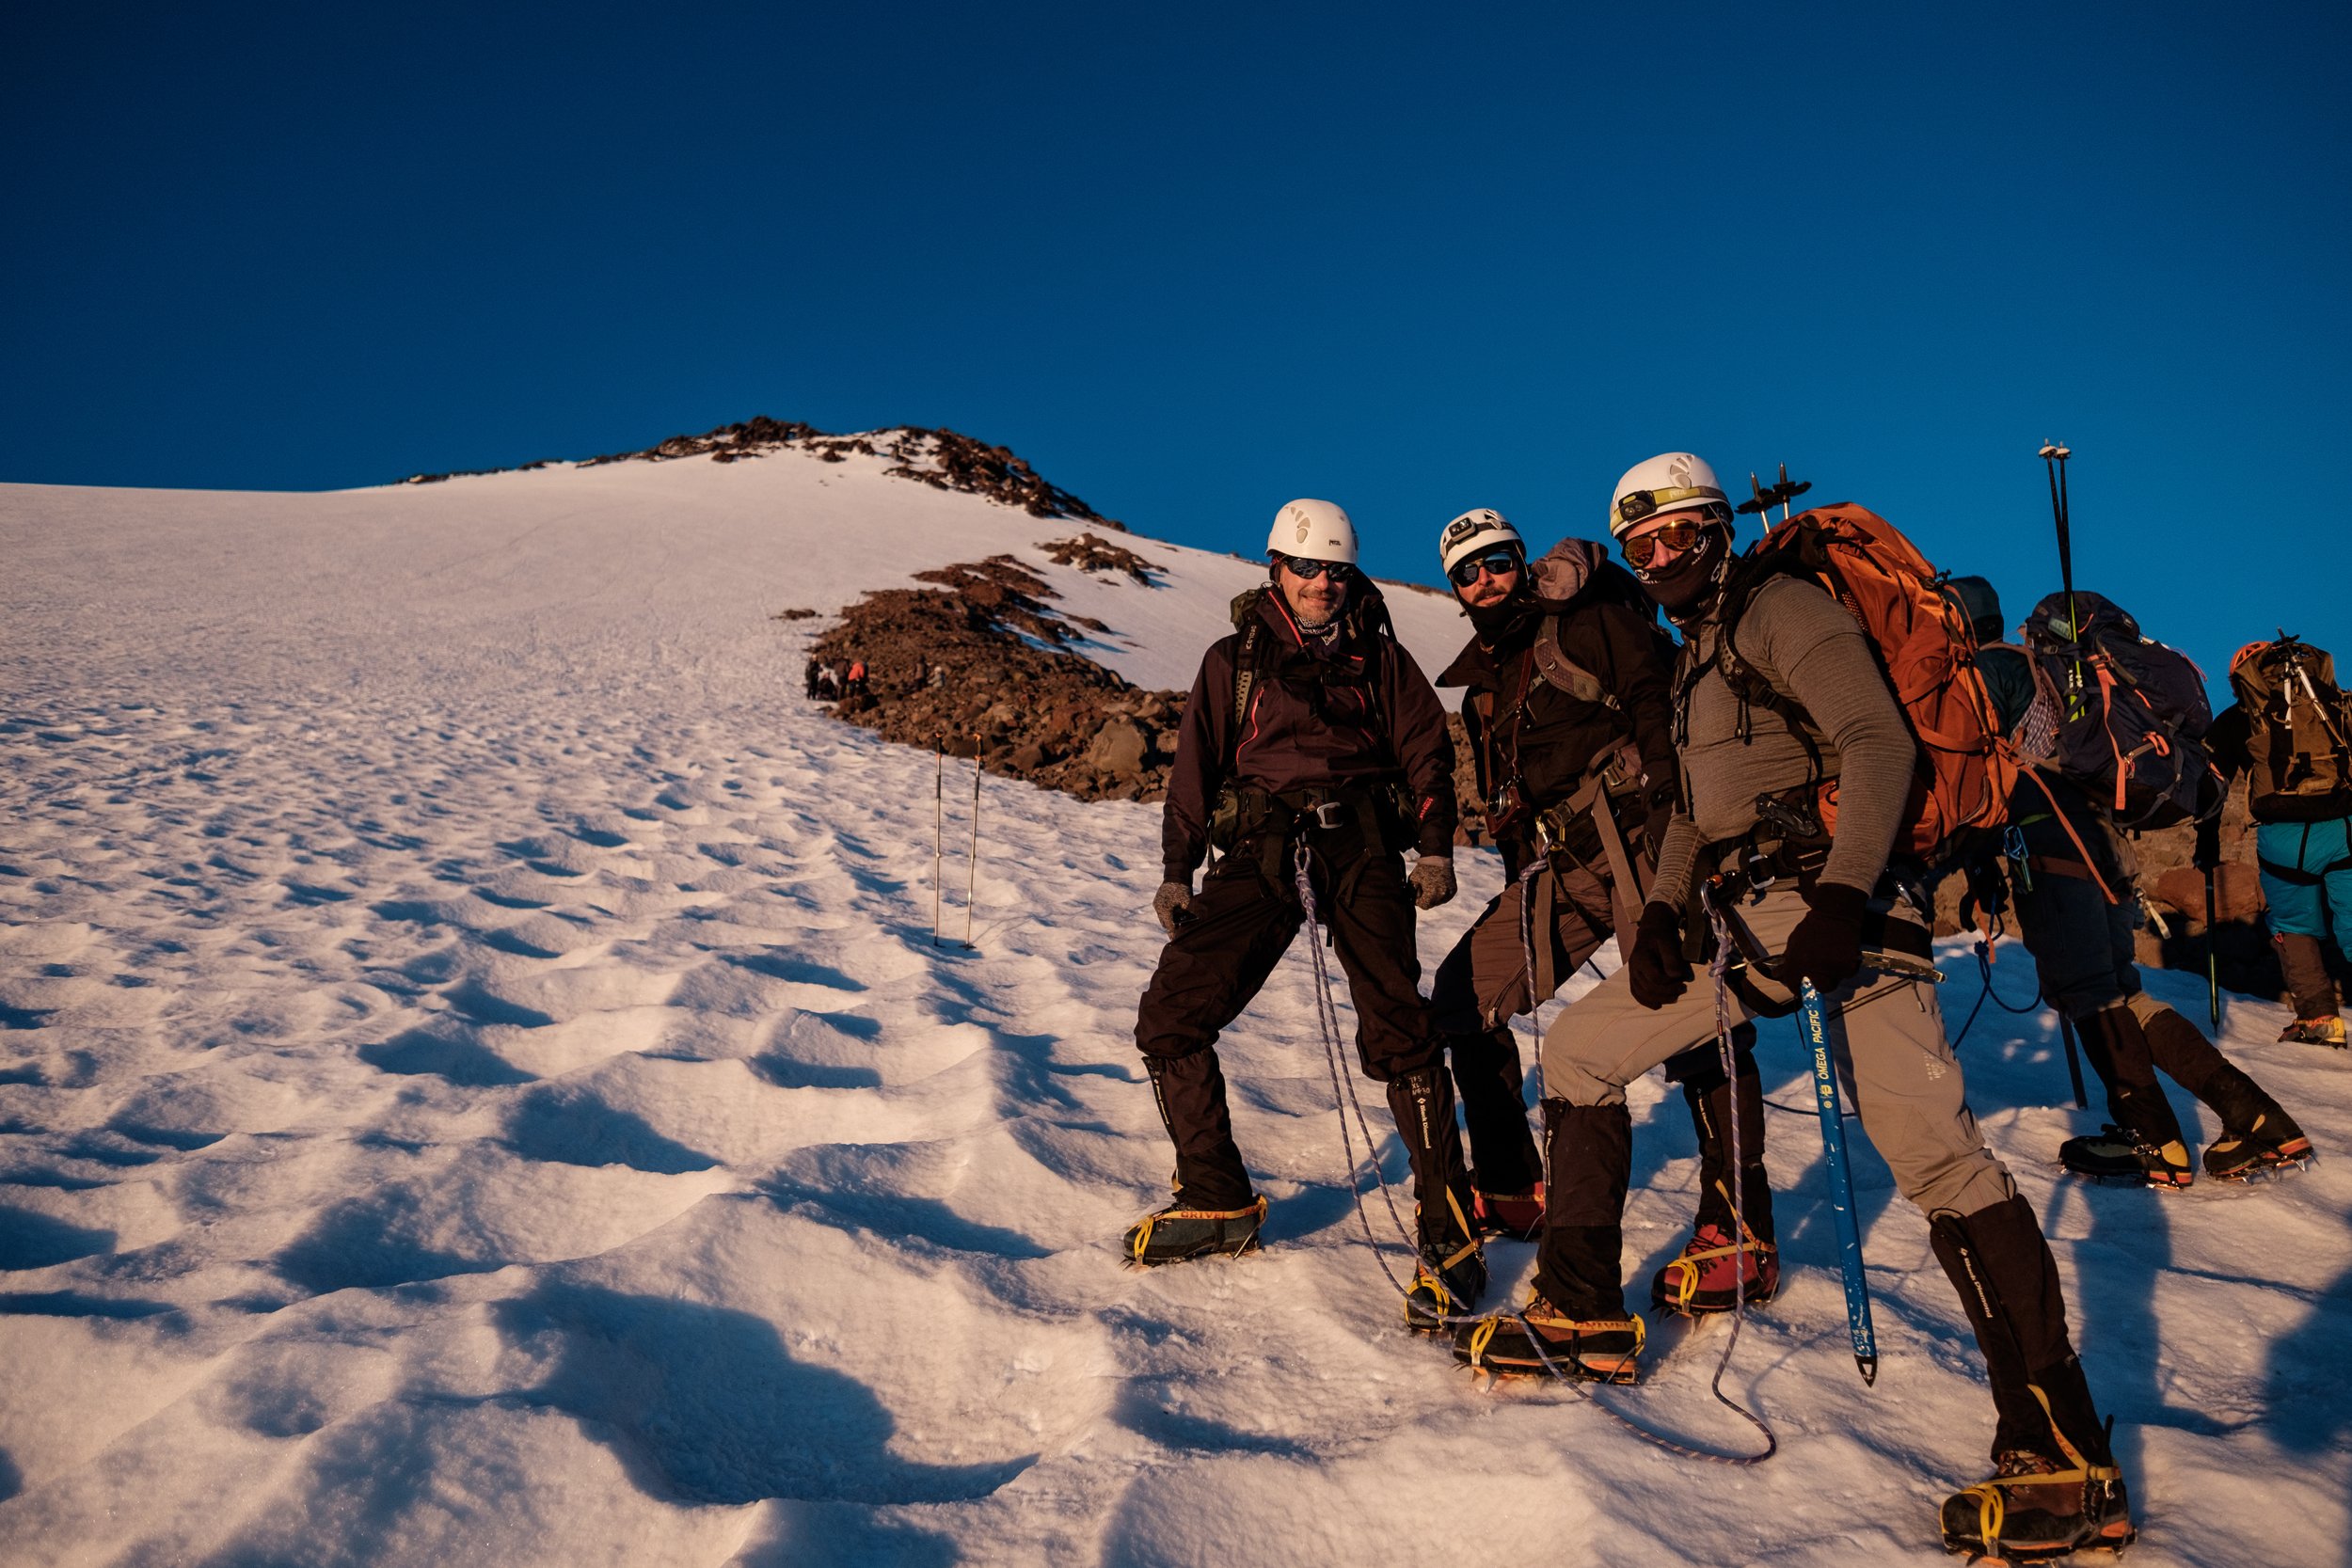 Mountaineers pose together on their summit attempt of mt shasta